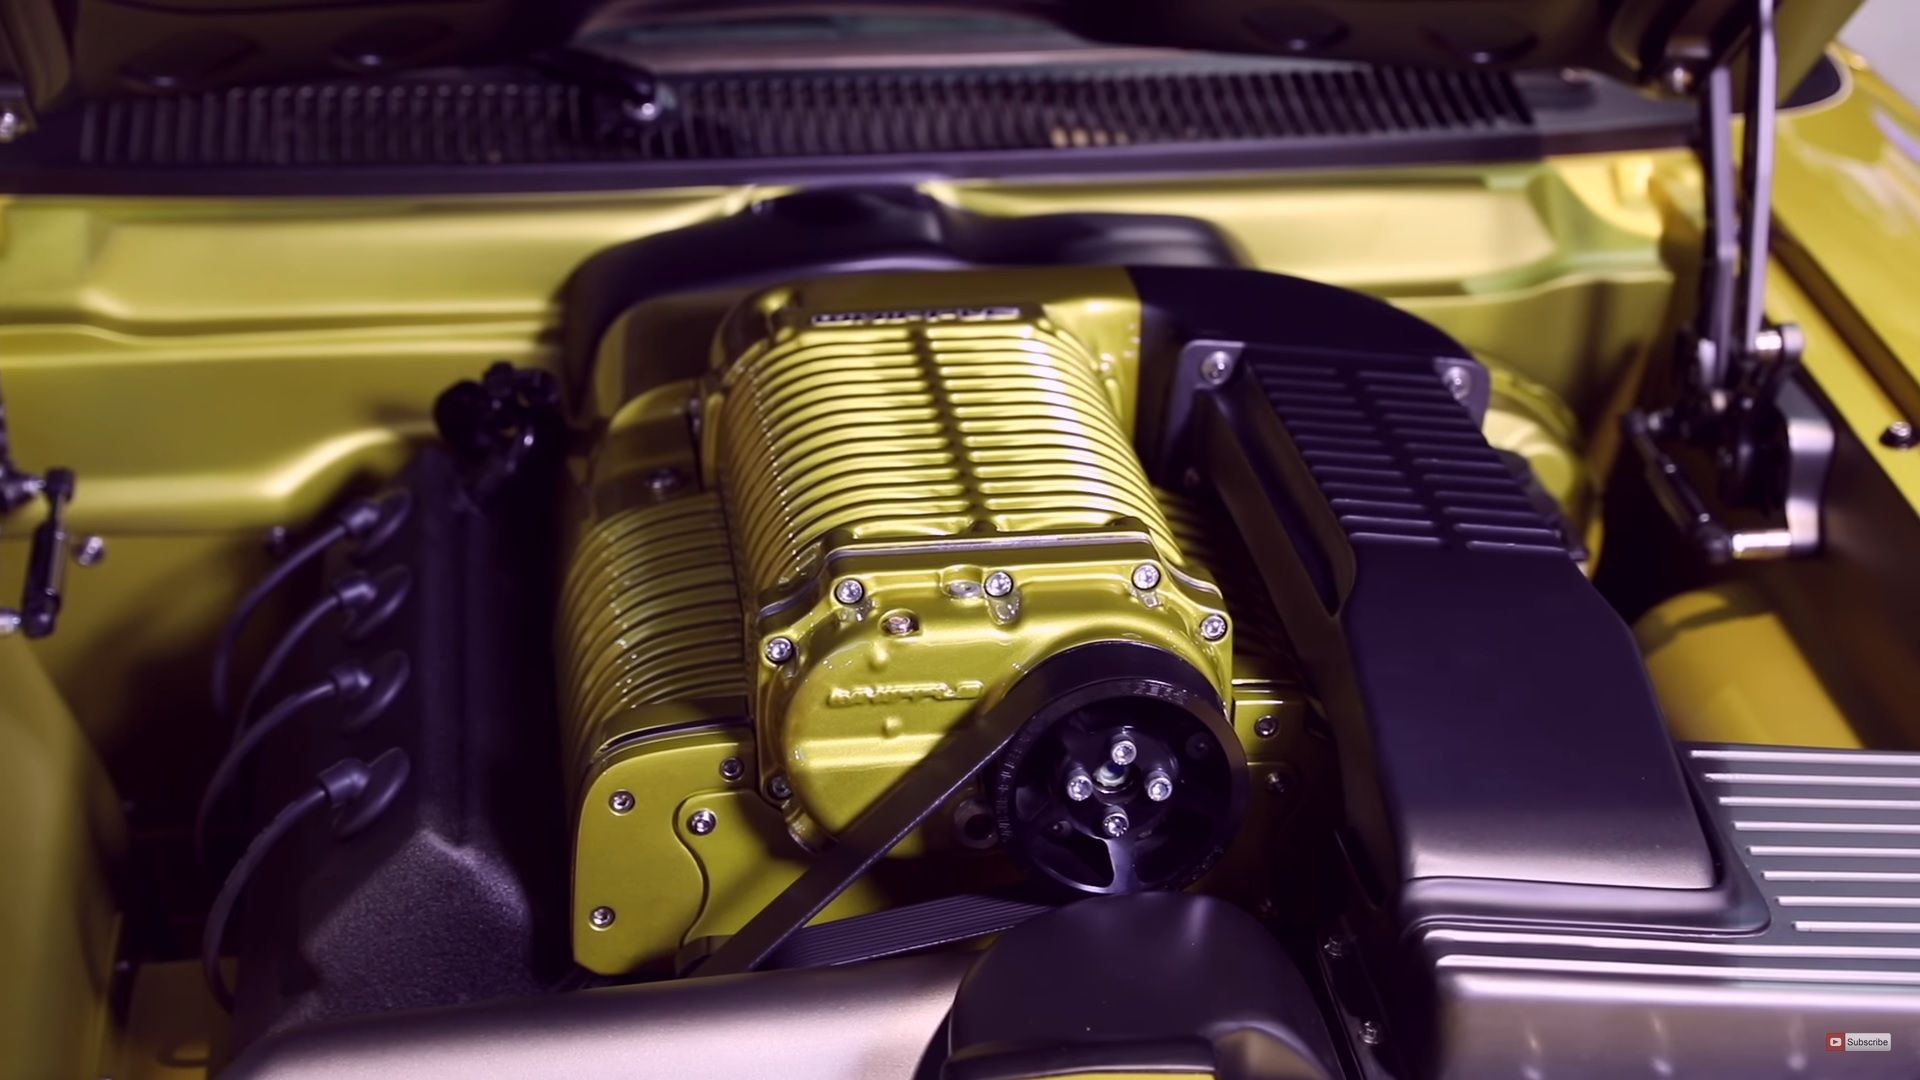 Modified Dodge Challenger Hellcat engine with 1,100 horsepower!